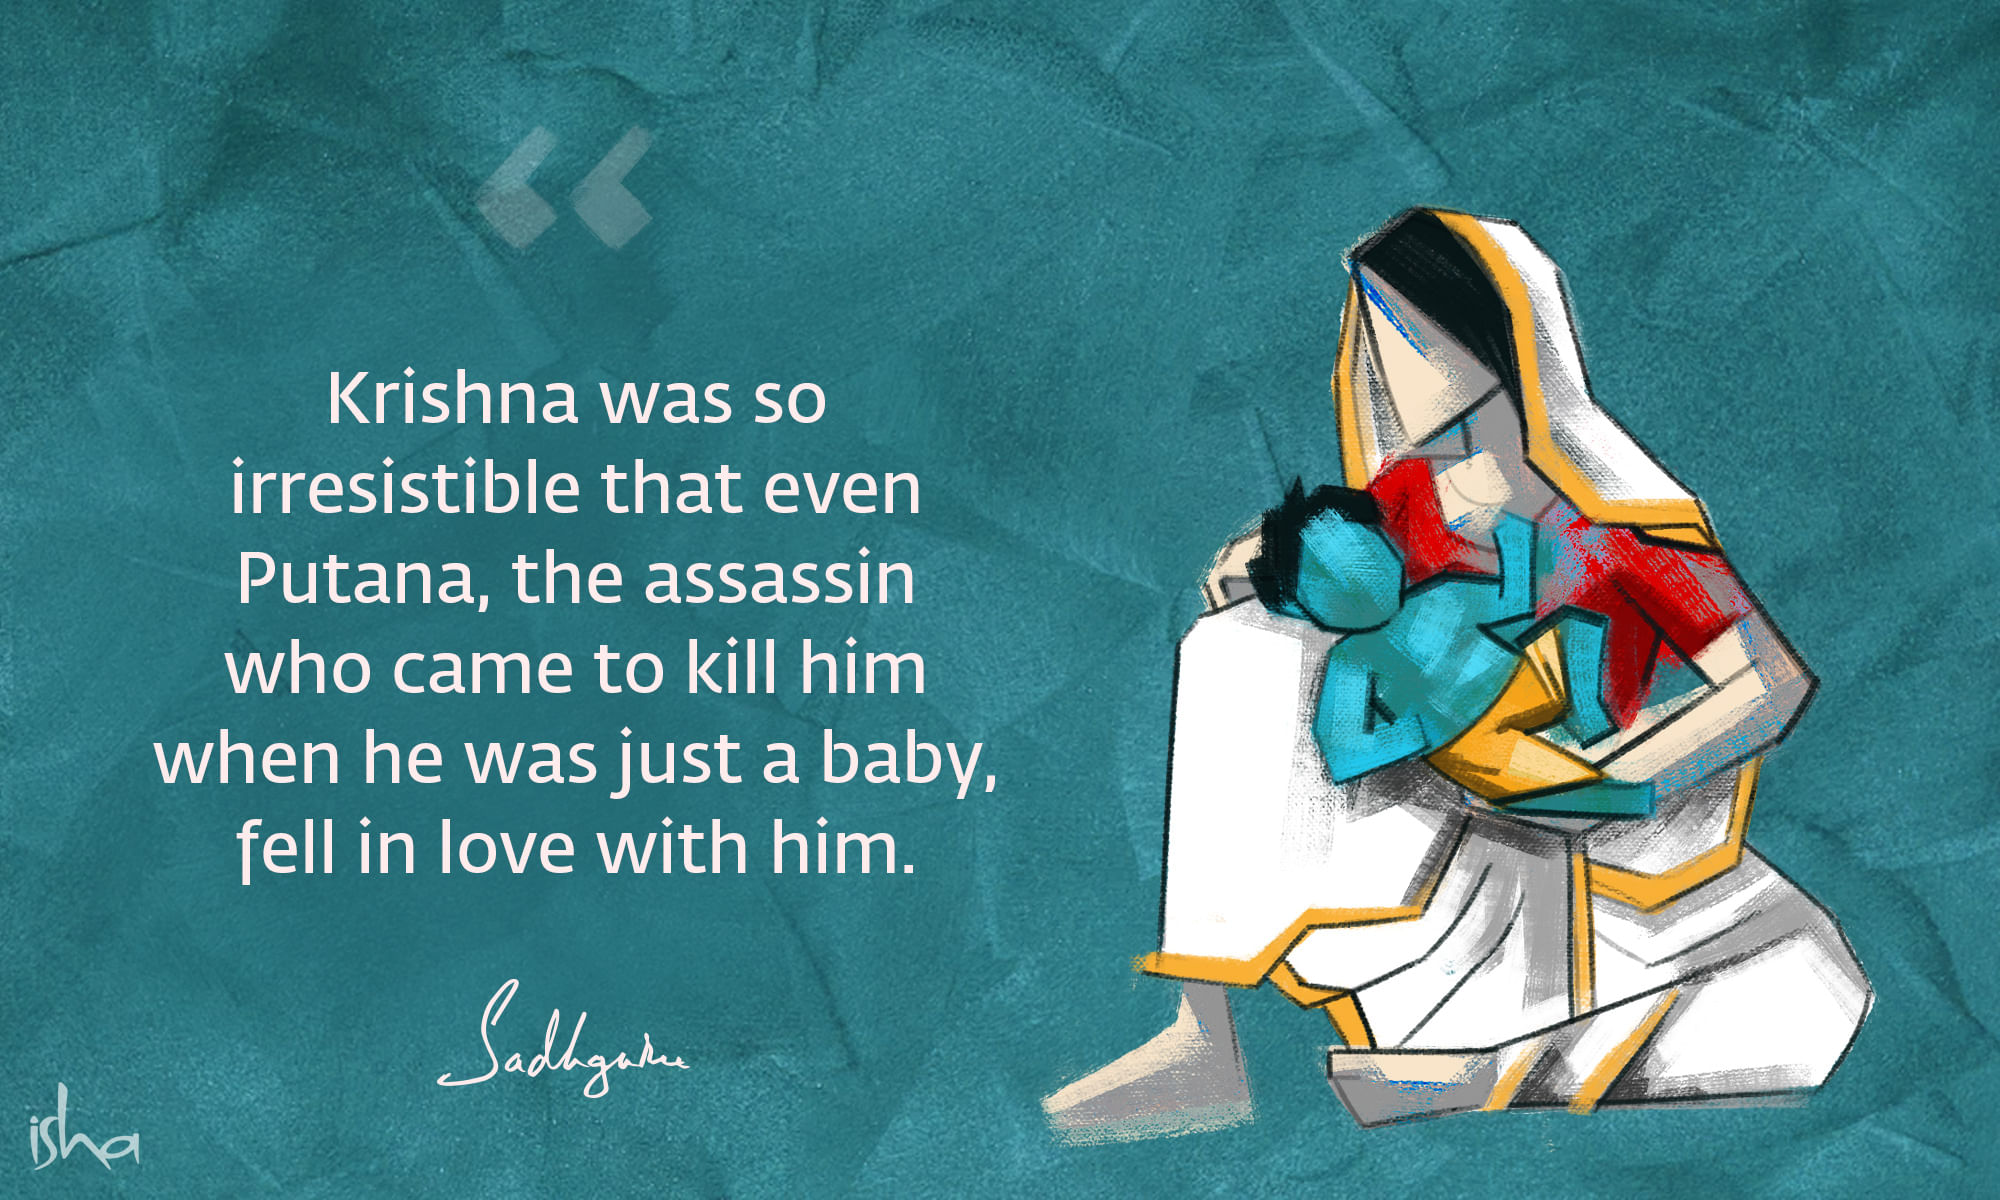 Krishna quote from Sadhguru with abstract female assassin falling in love with baby Krishna.